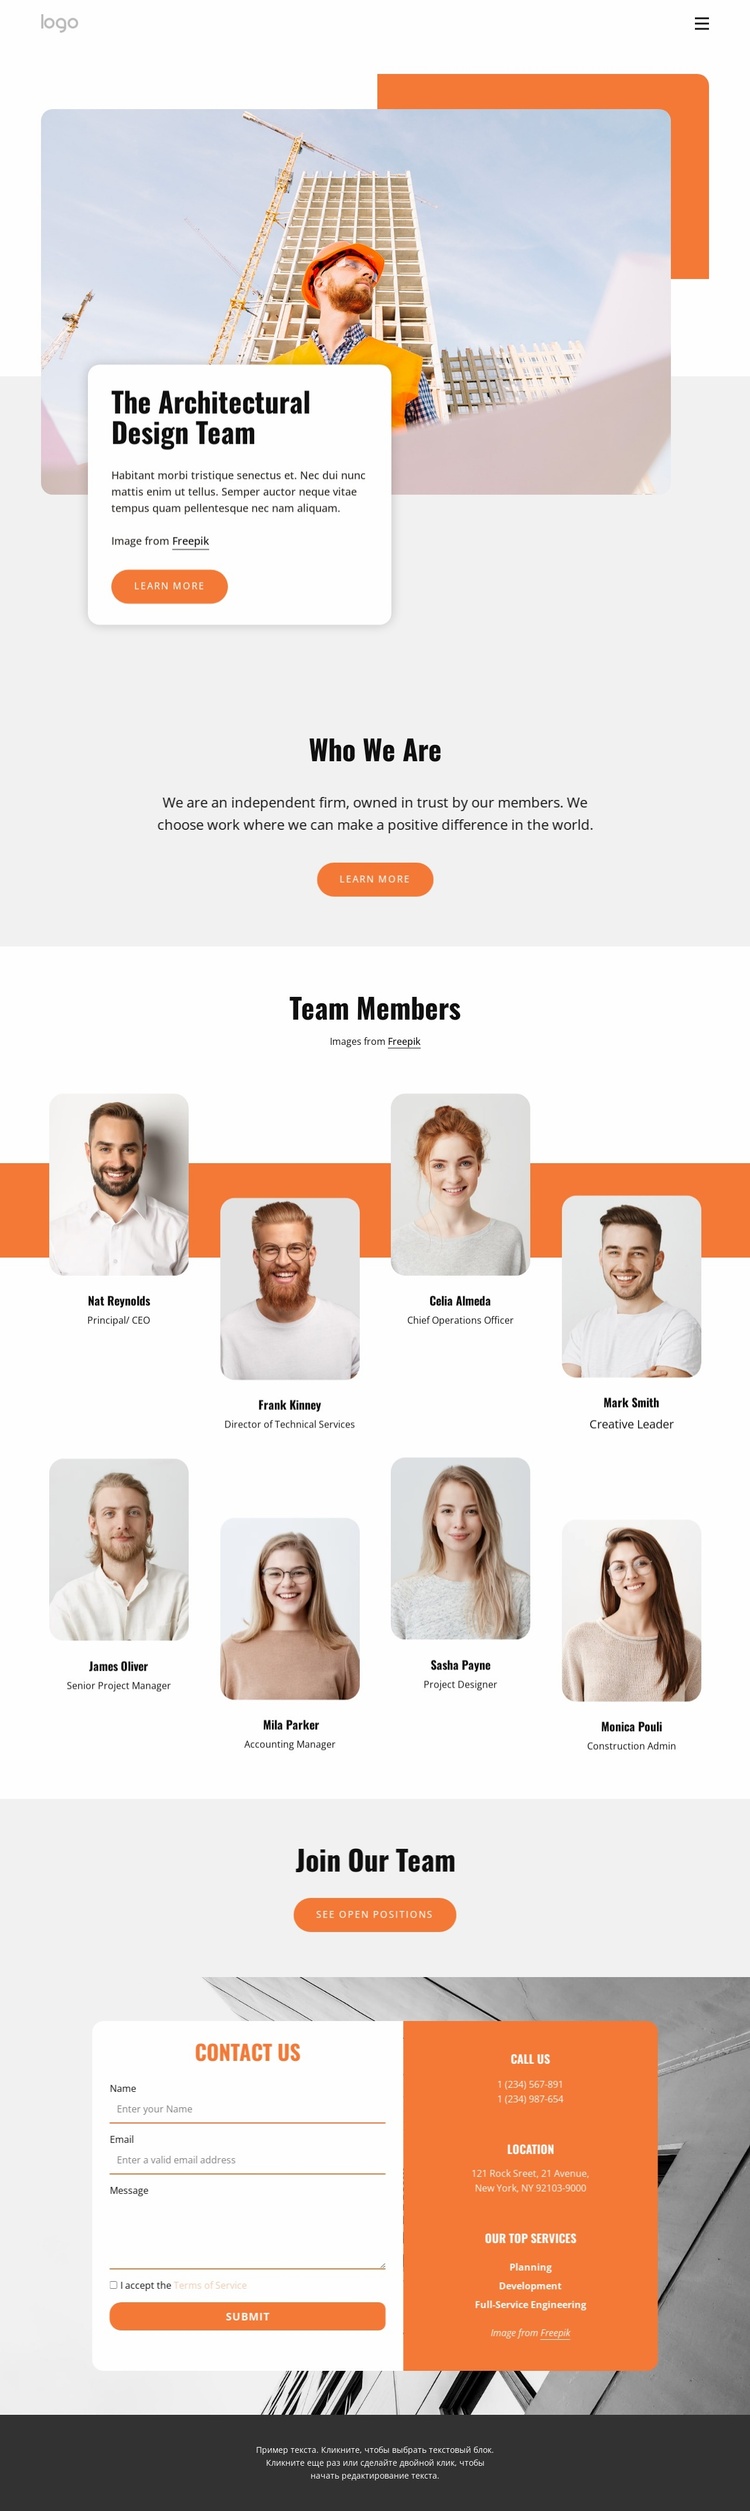 The planning firm with 53 offices and 7000+ professionals Landing Page